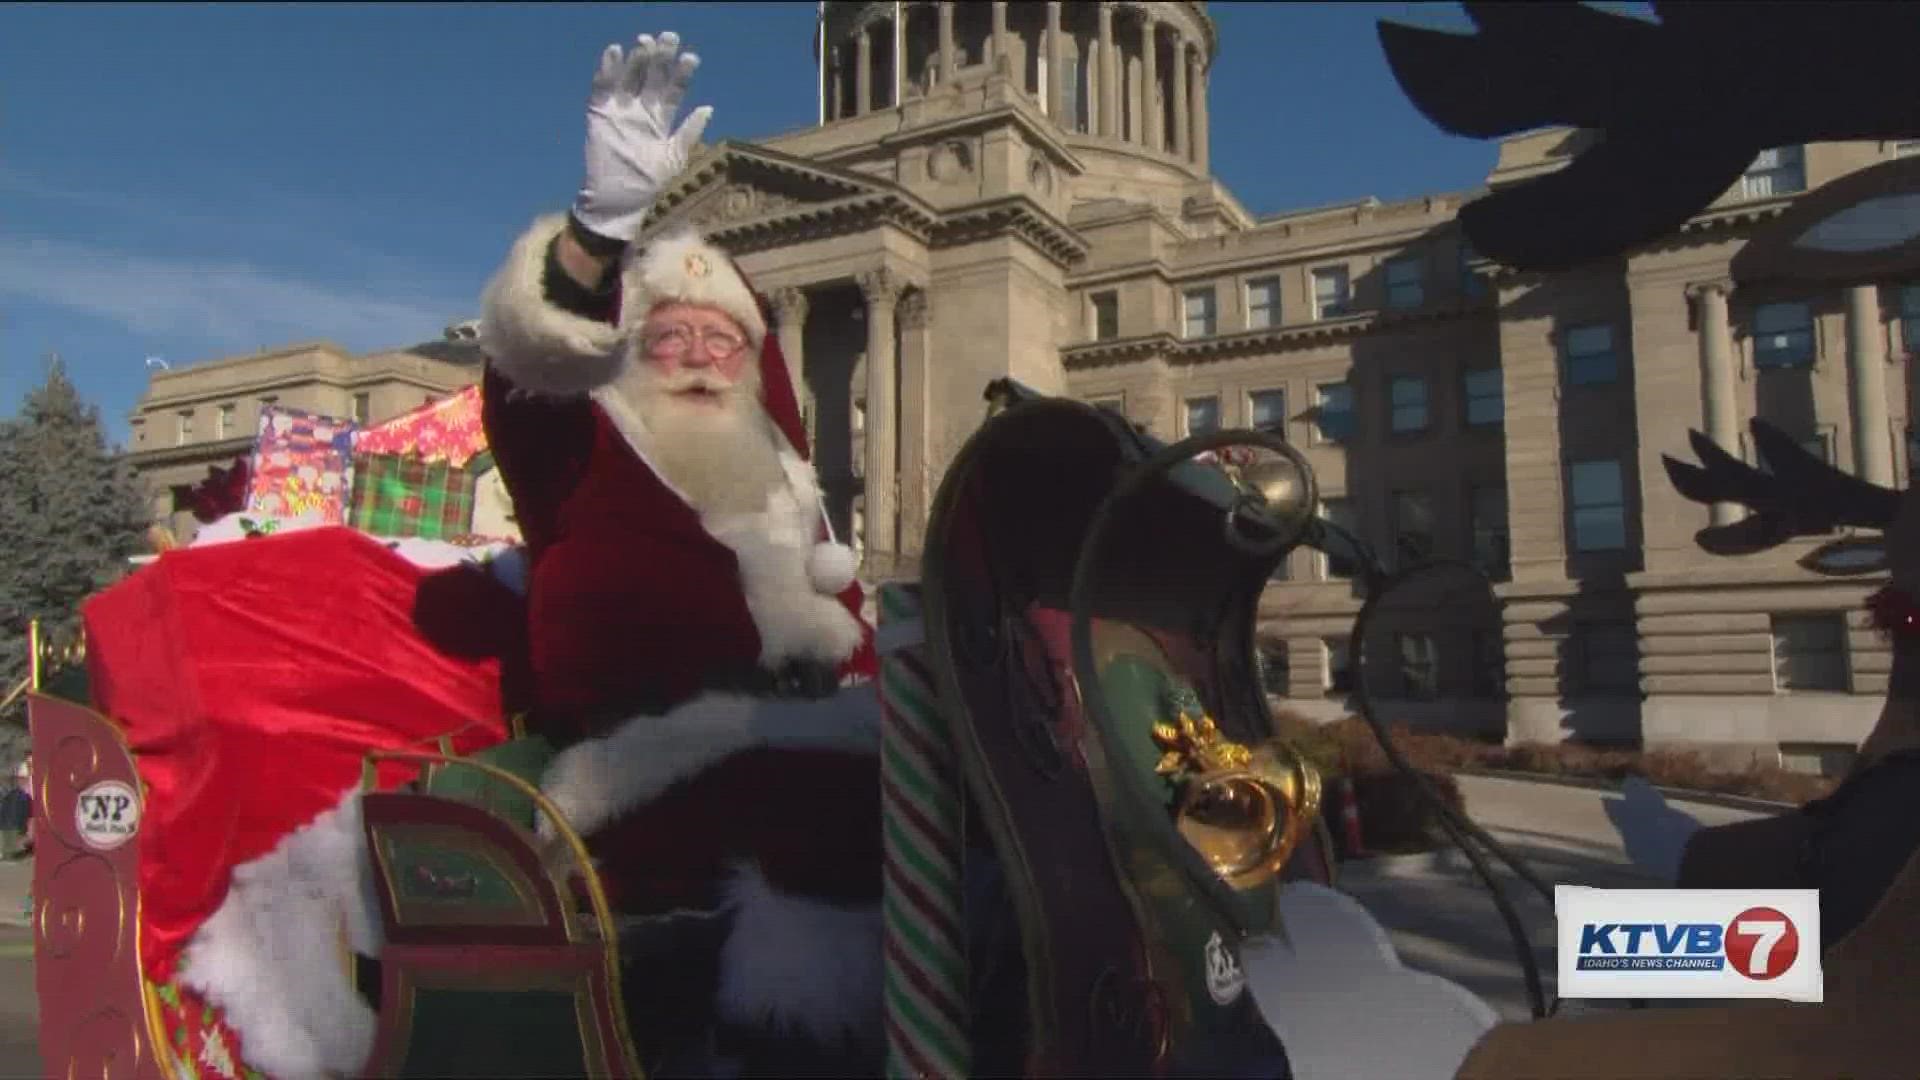 The 2022 Boise Holiday Parade brings the holiday spirit to downtown Boise Saturday morning with locally-built floats, dance teams, choirs, impressive cars and more.